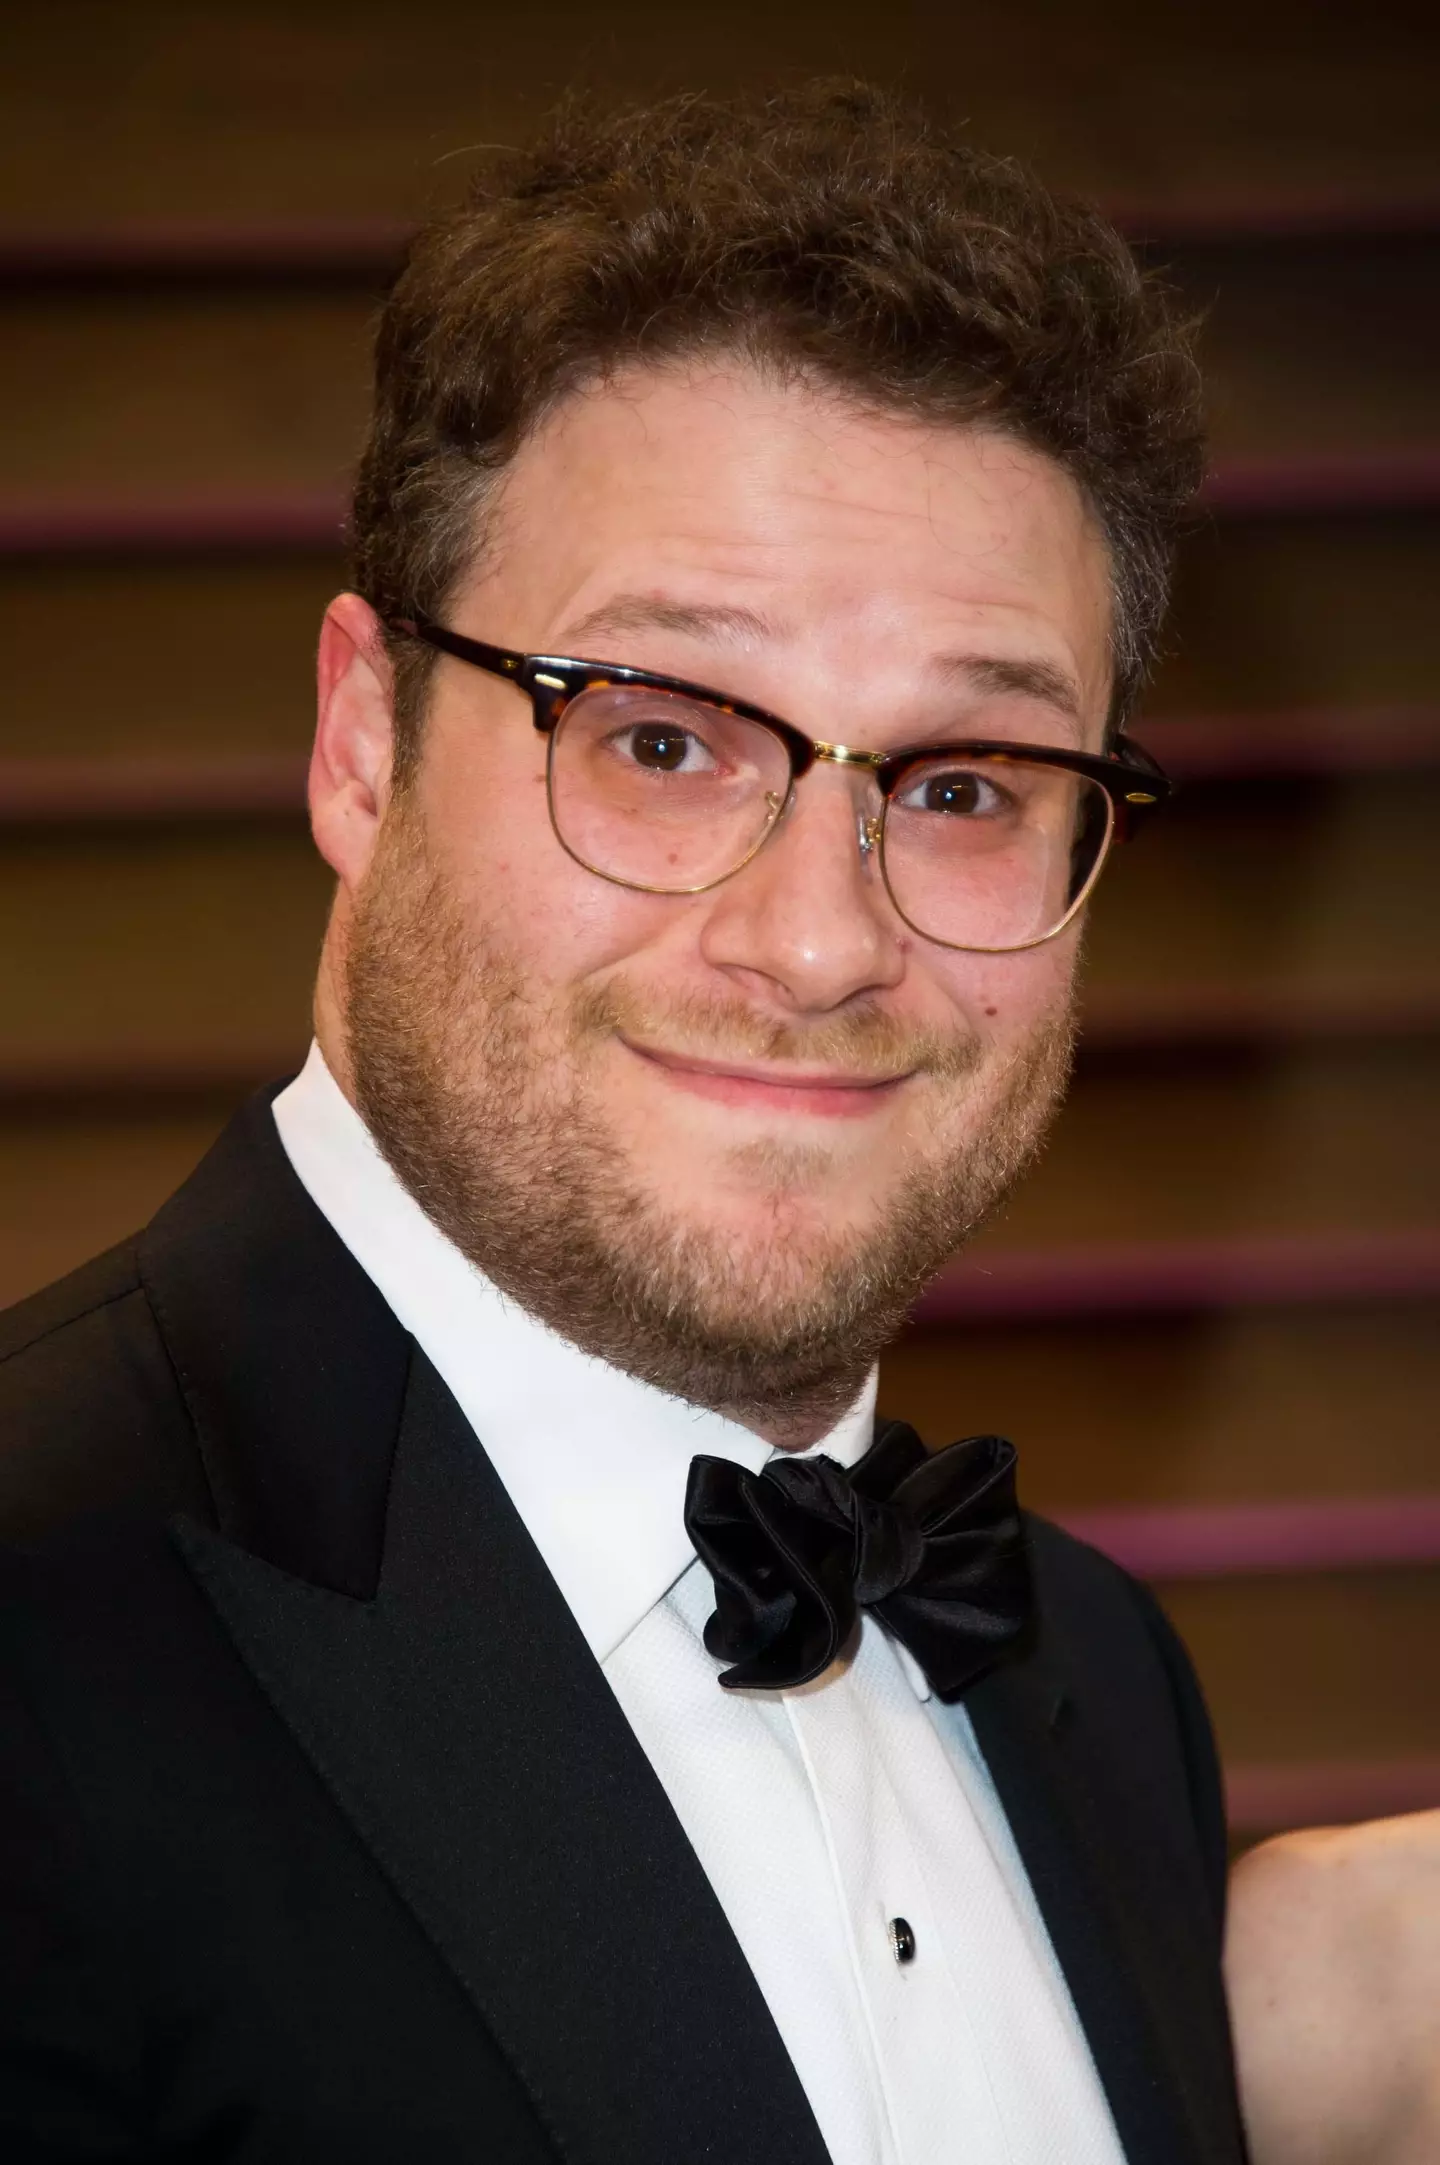 Seth Rogen feels deeply connected to the film.